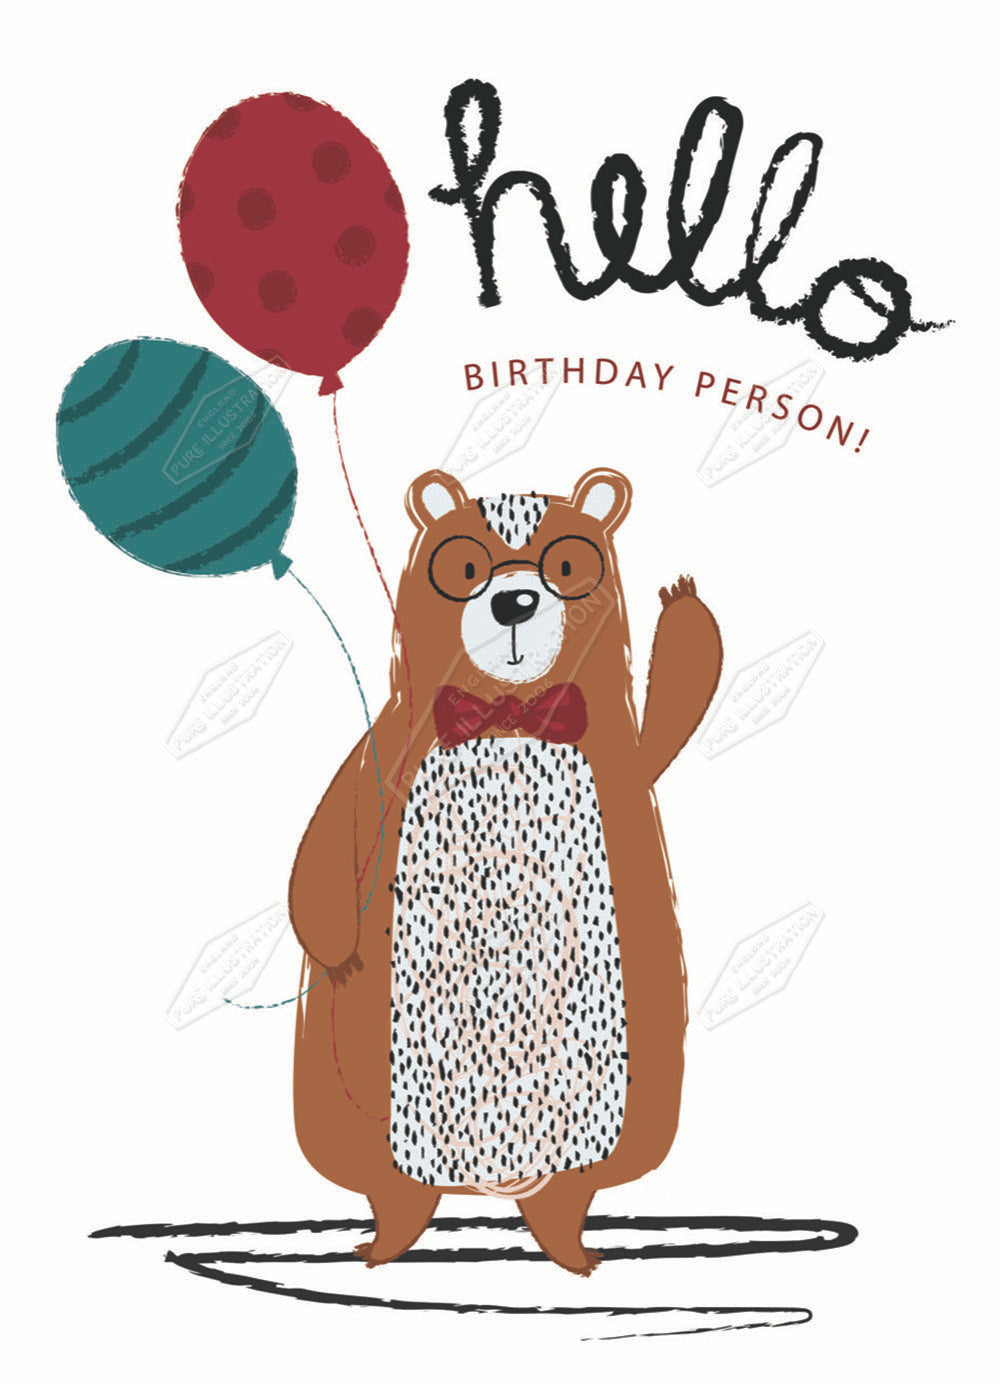 00032248KSP- Kerry Spurling is represented by Pure Art Licensing Agency - Birthday Greeting Card Design